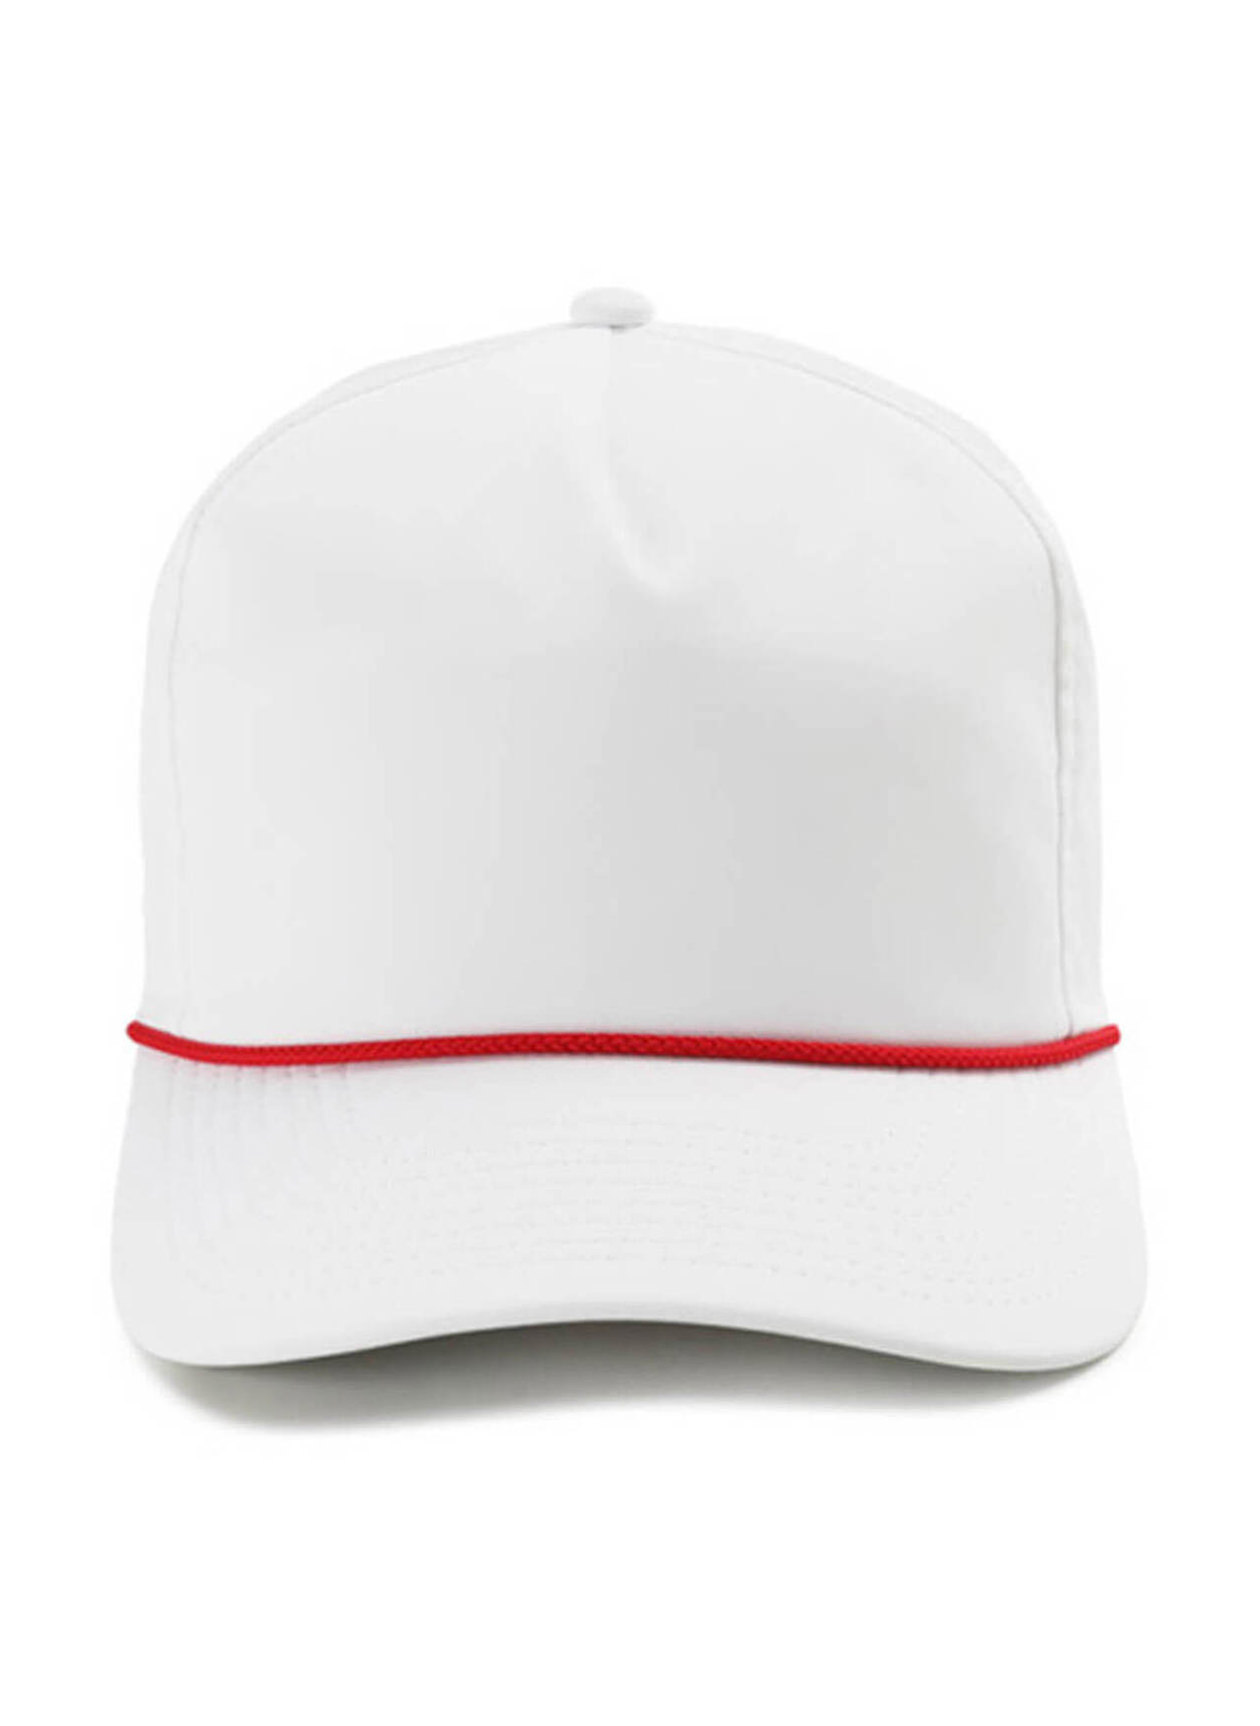 Imperial White / Red The Wrightson Performance Rope Hat